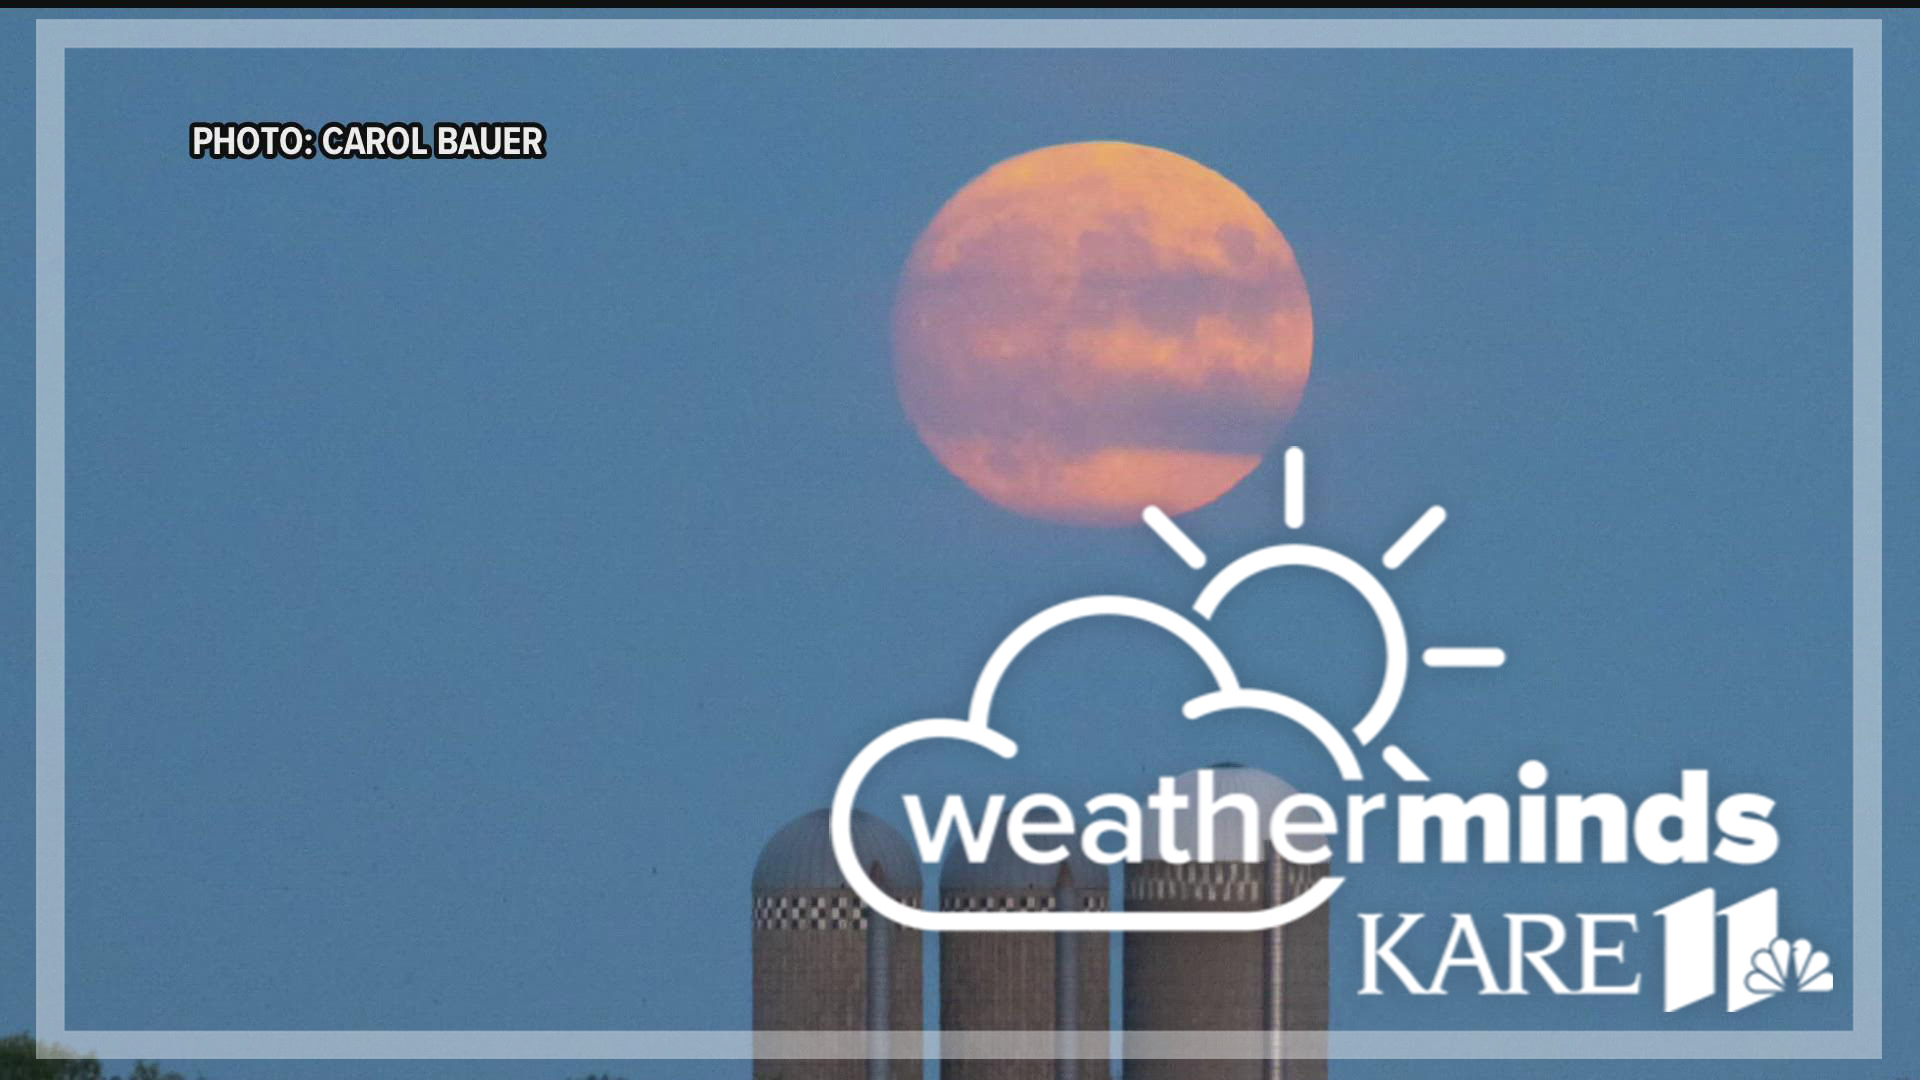 KARE 11 meteorologist Ben Dery shows us what backyard astrologers can expect to see throughout the month of July.